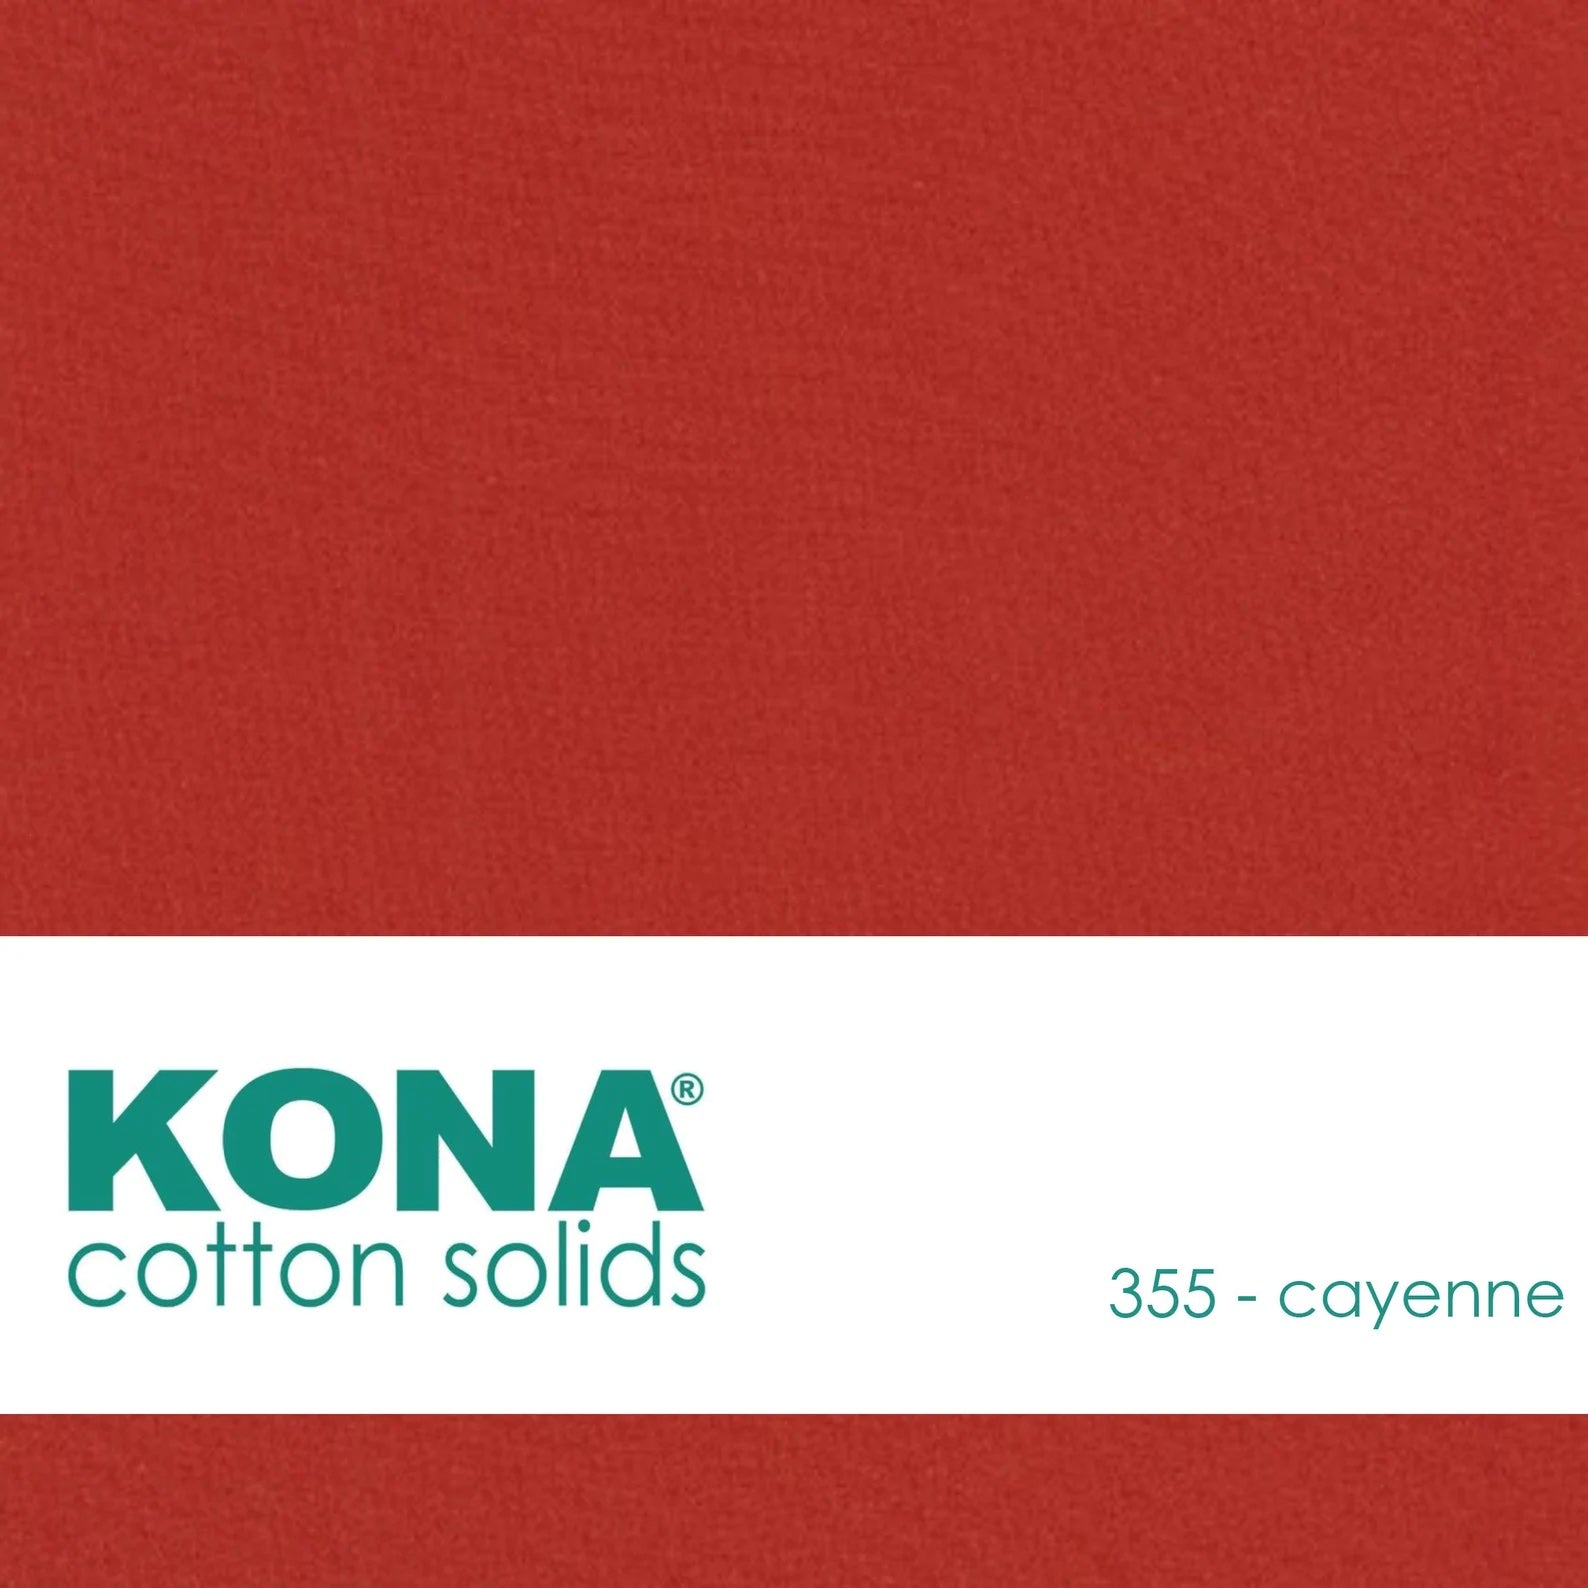 Kona Cotton Solid Fabric in Cayenne